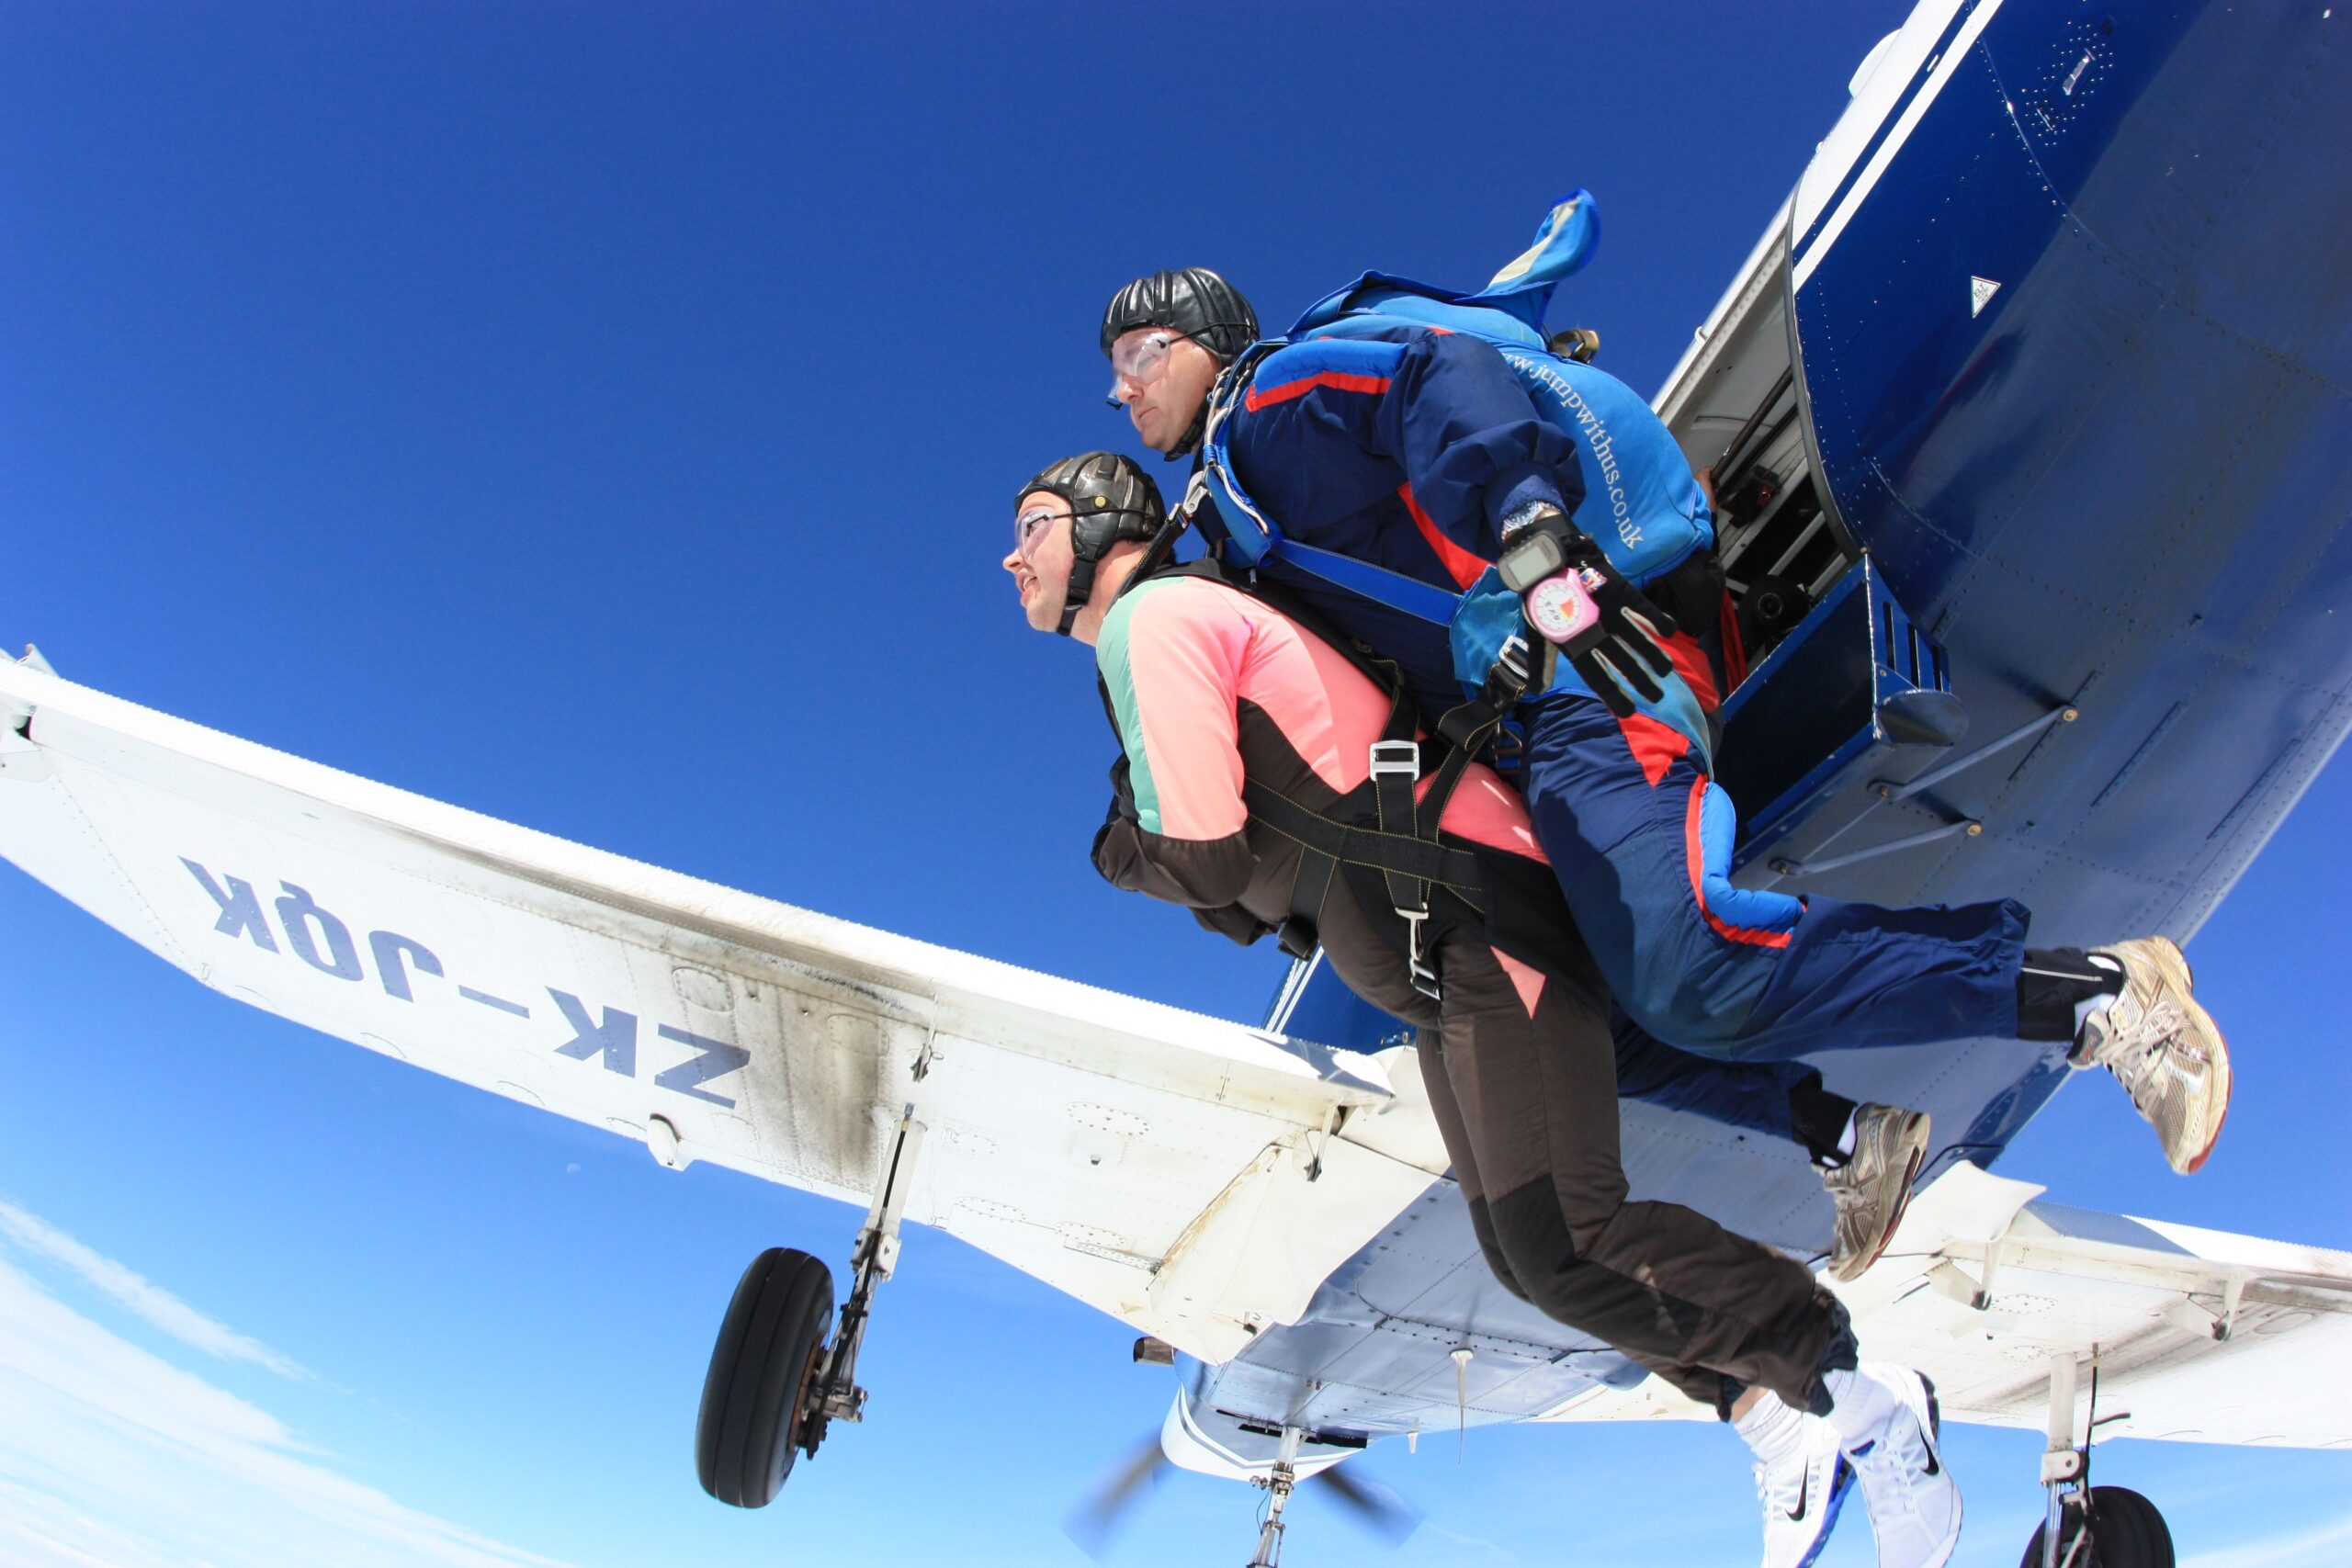 Skydive – Fully booked